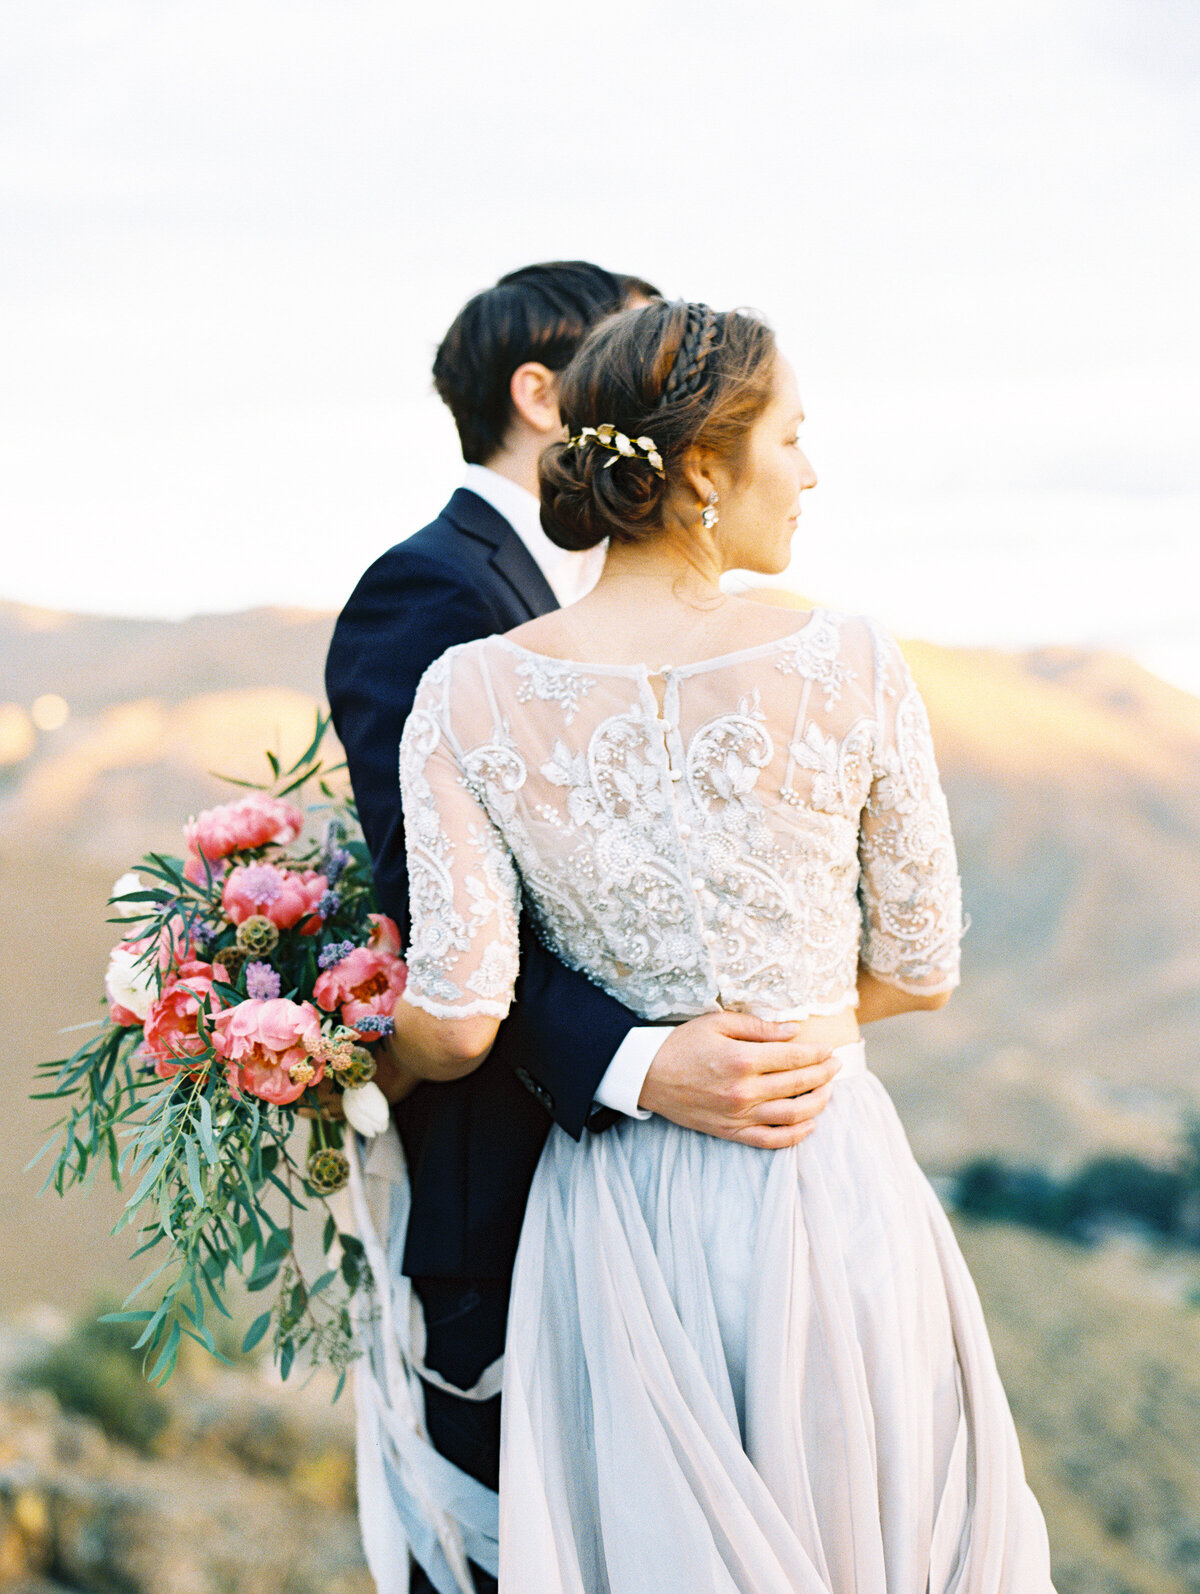 Sunrise Elopement Photos in Leanne Marshall-10